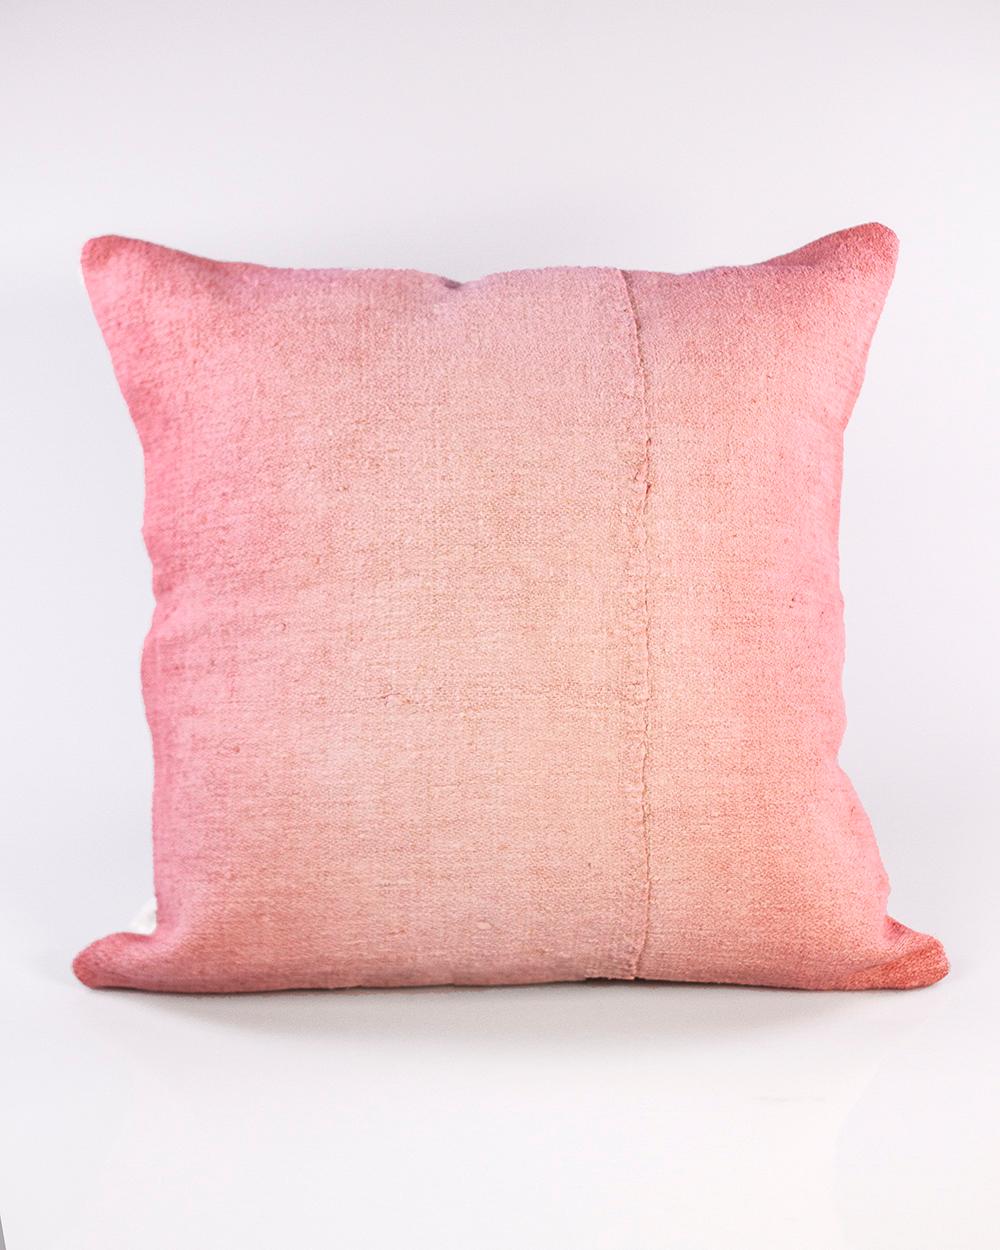 Espanyolet Pink Ombre Hand-Painted Vintage Linen Pillow 24